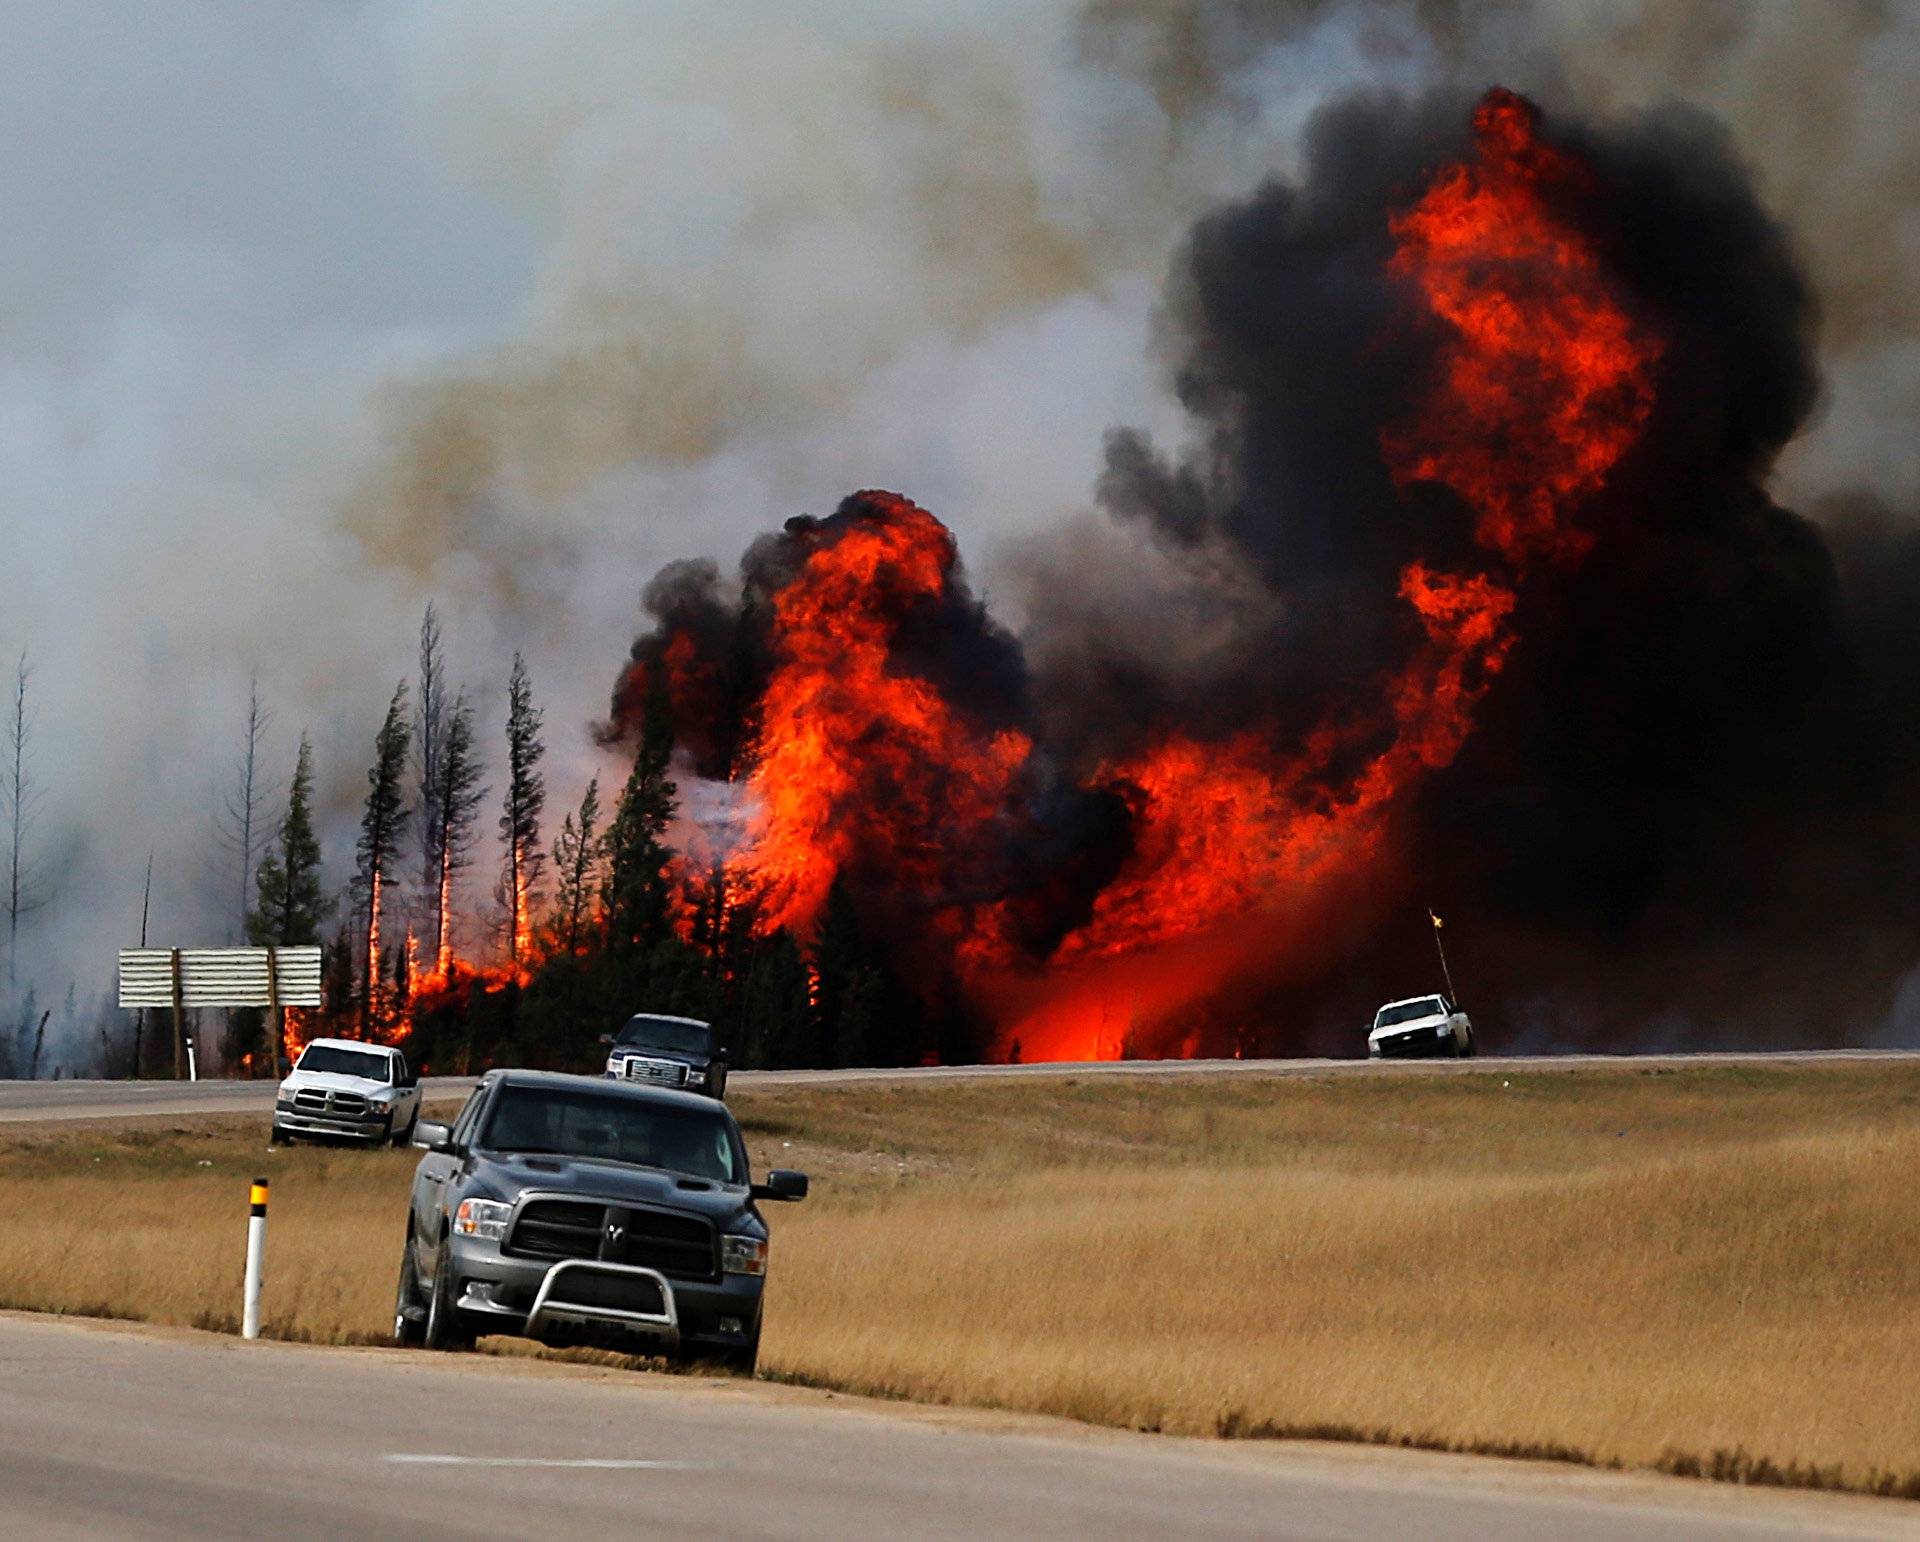 Smoke and flames from the wildfires erupt behind cars on the highway near Fort McMurray